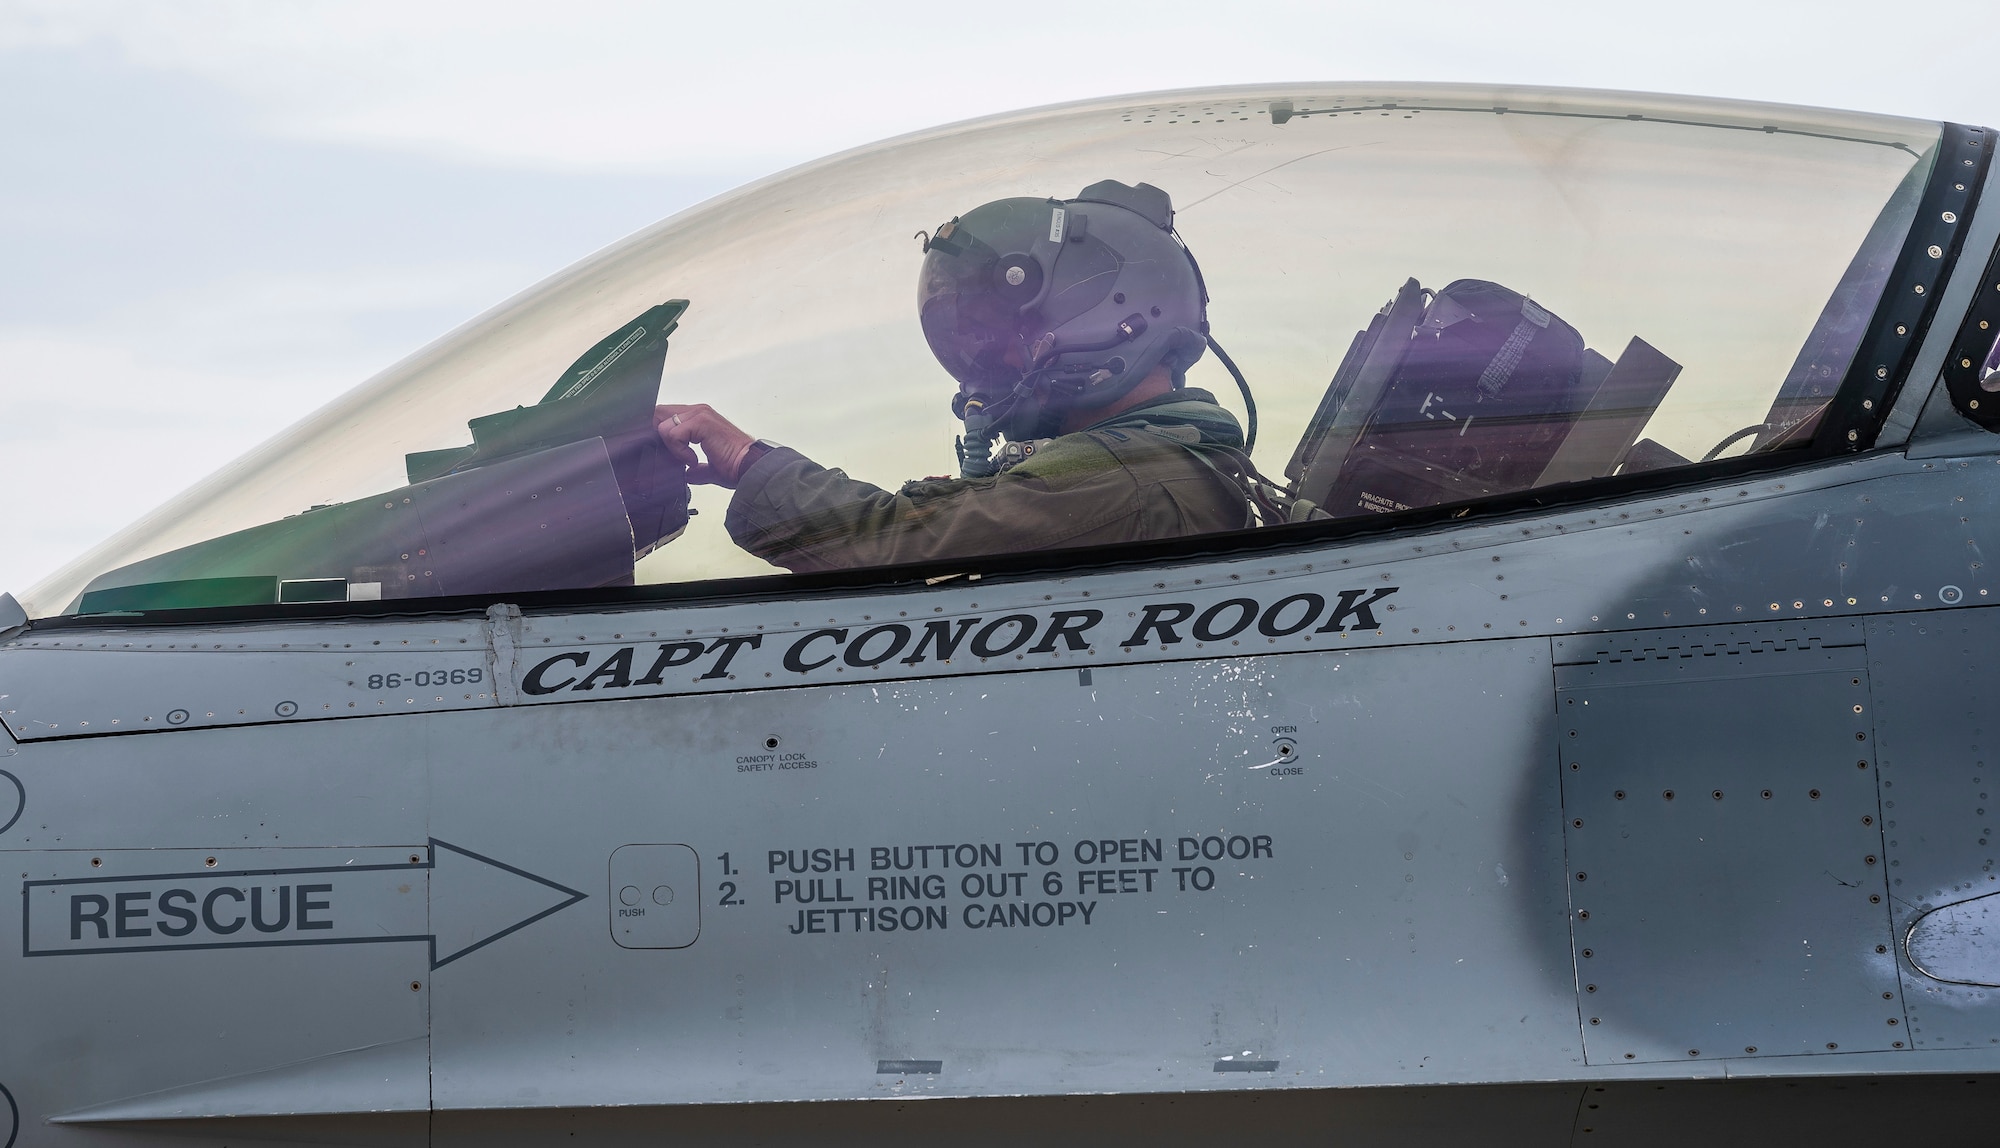 An F-16 Fighting Falcon, assigned to the 121st Fighter Squadron at Joint Base Andrews, Maryland, prepares for take off at Dover Air Force Base, Delaware, Nov. 25, 2020. The aircraft stopped at Dover Air Force Base during routine flight training operations. The base prioritizes providing unrivaled installation support for mission partners, transit aircraft and neighboring installations. (U.S. Air Force photo by Senior Airman Christopher Quail)